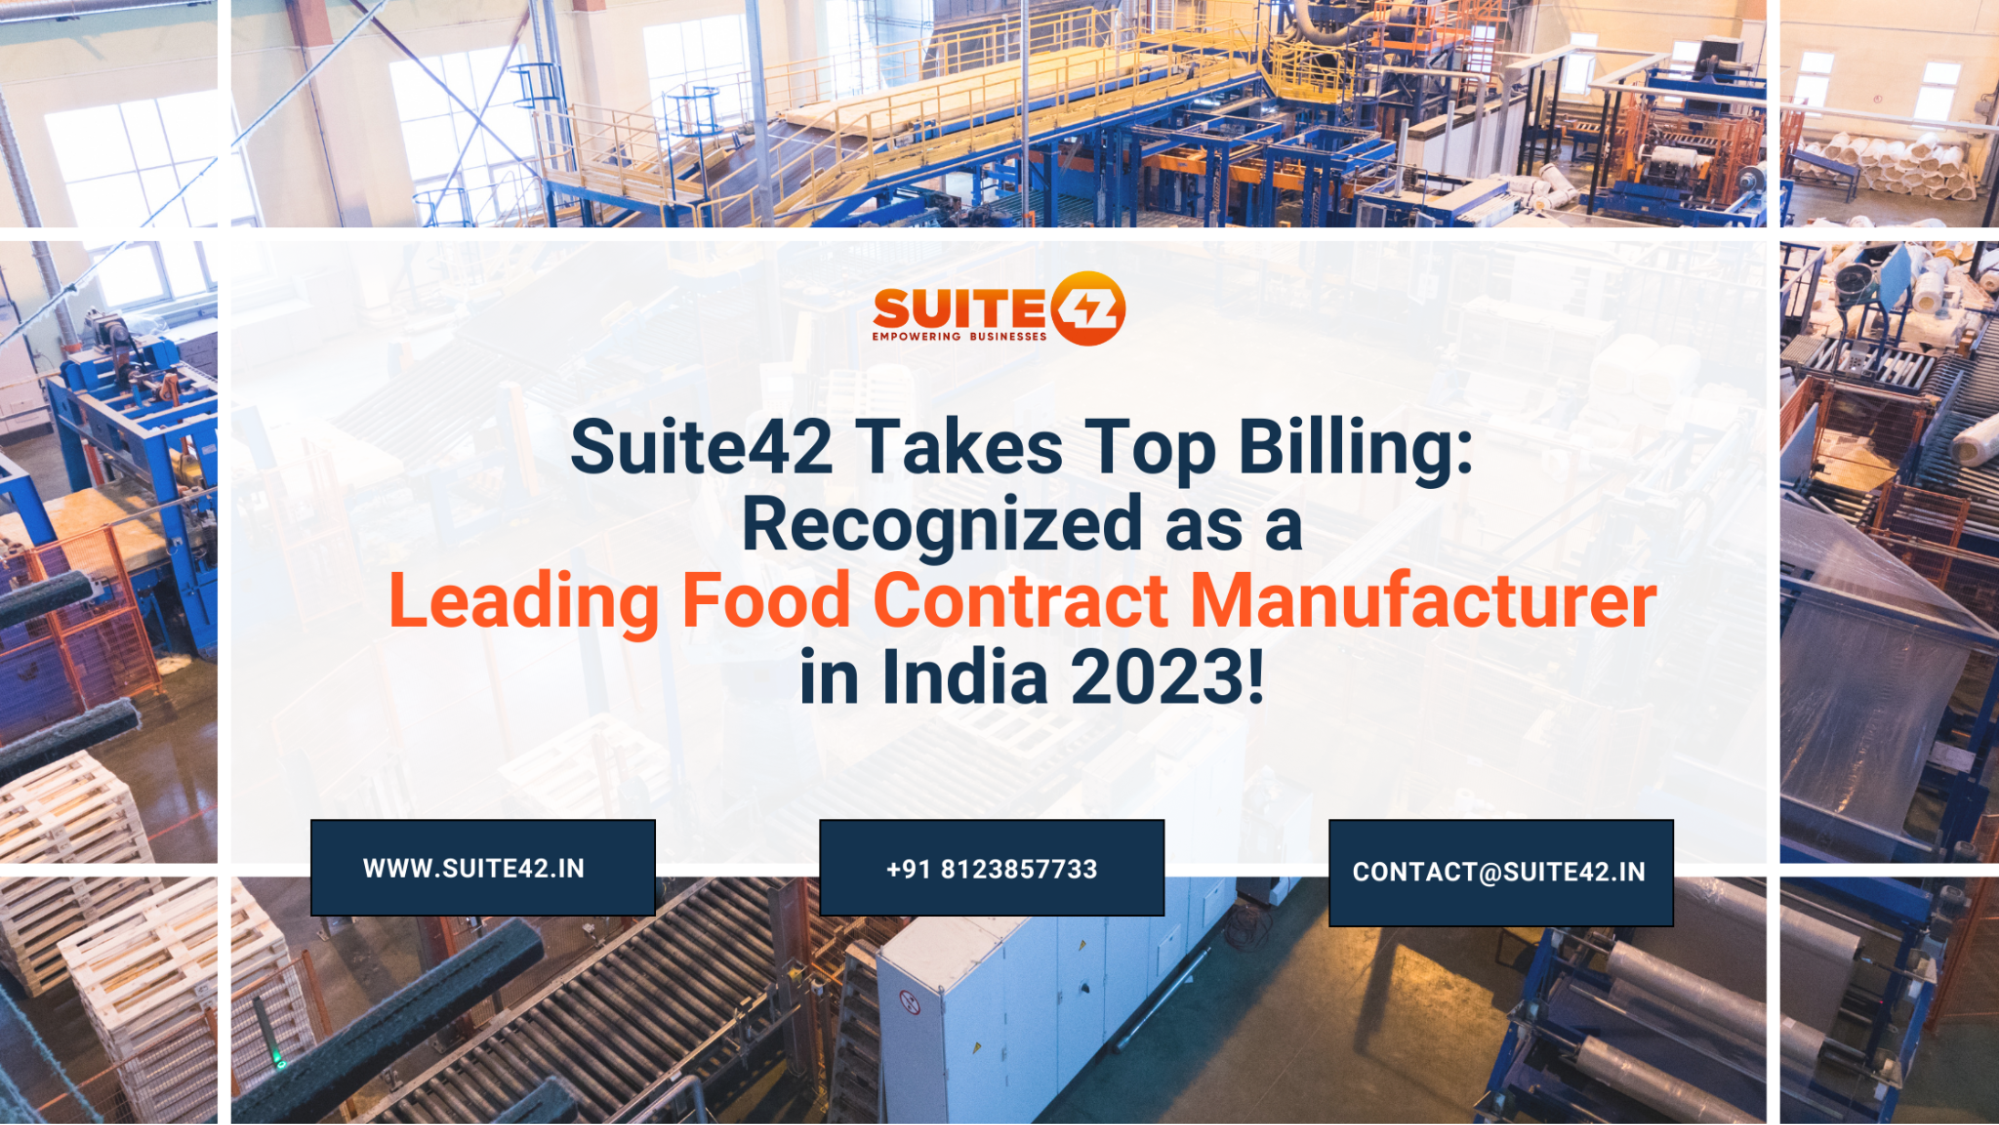 Suite42 is among the top 10 Food contract manufacturers